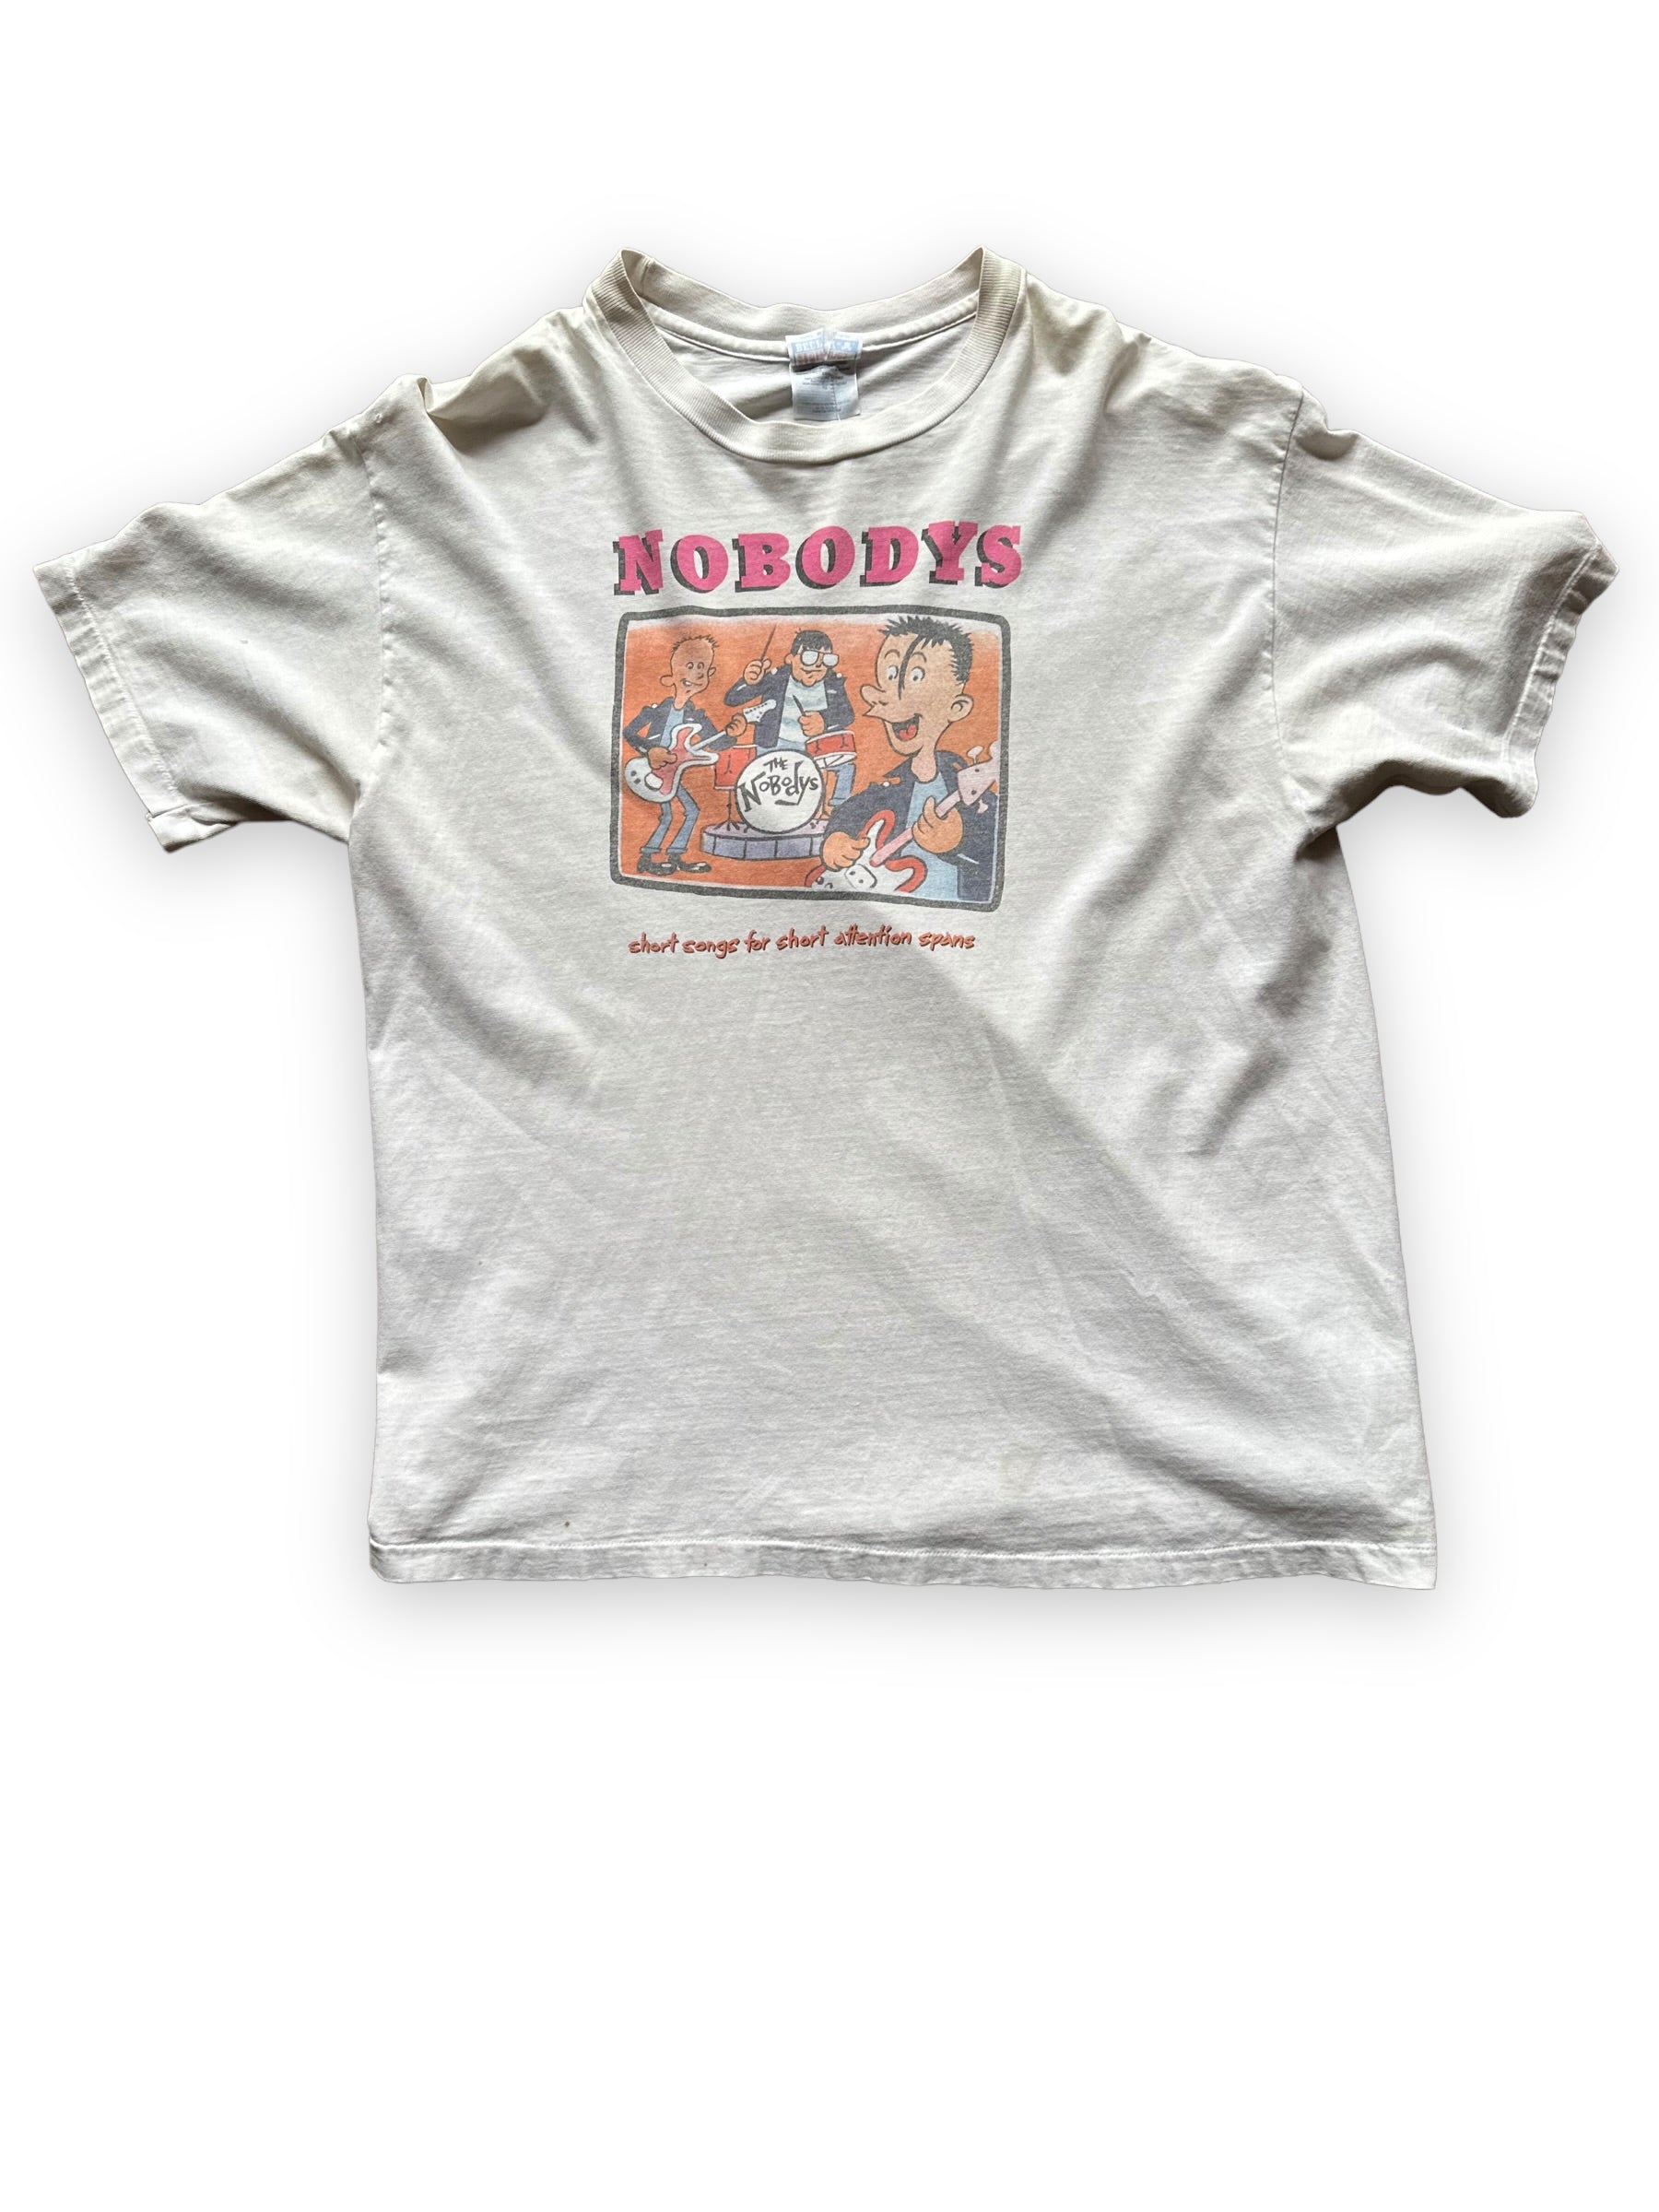 Front View of Vintage The Nobodys Short Songs For Short Attention Spans Tee SZ XL |  Hopeless Records Rock Tee | Barn Owl Vintage Seattle